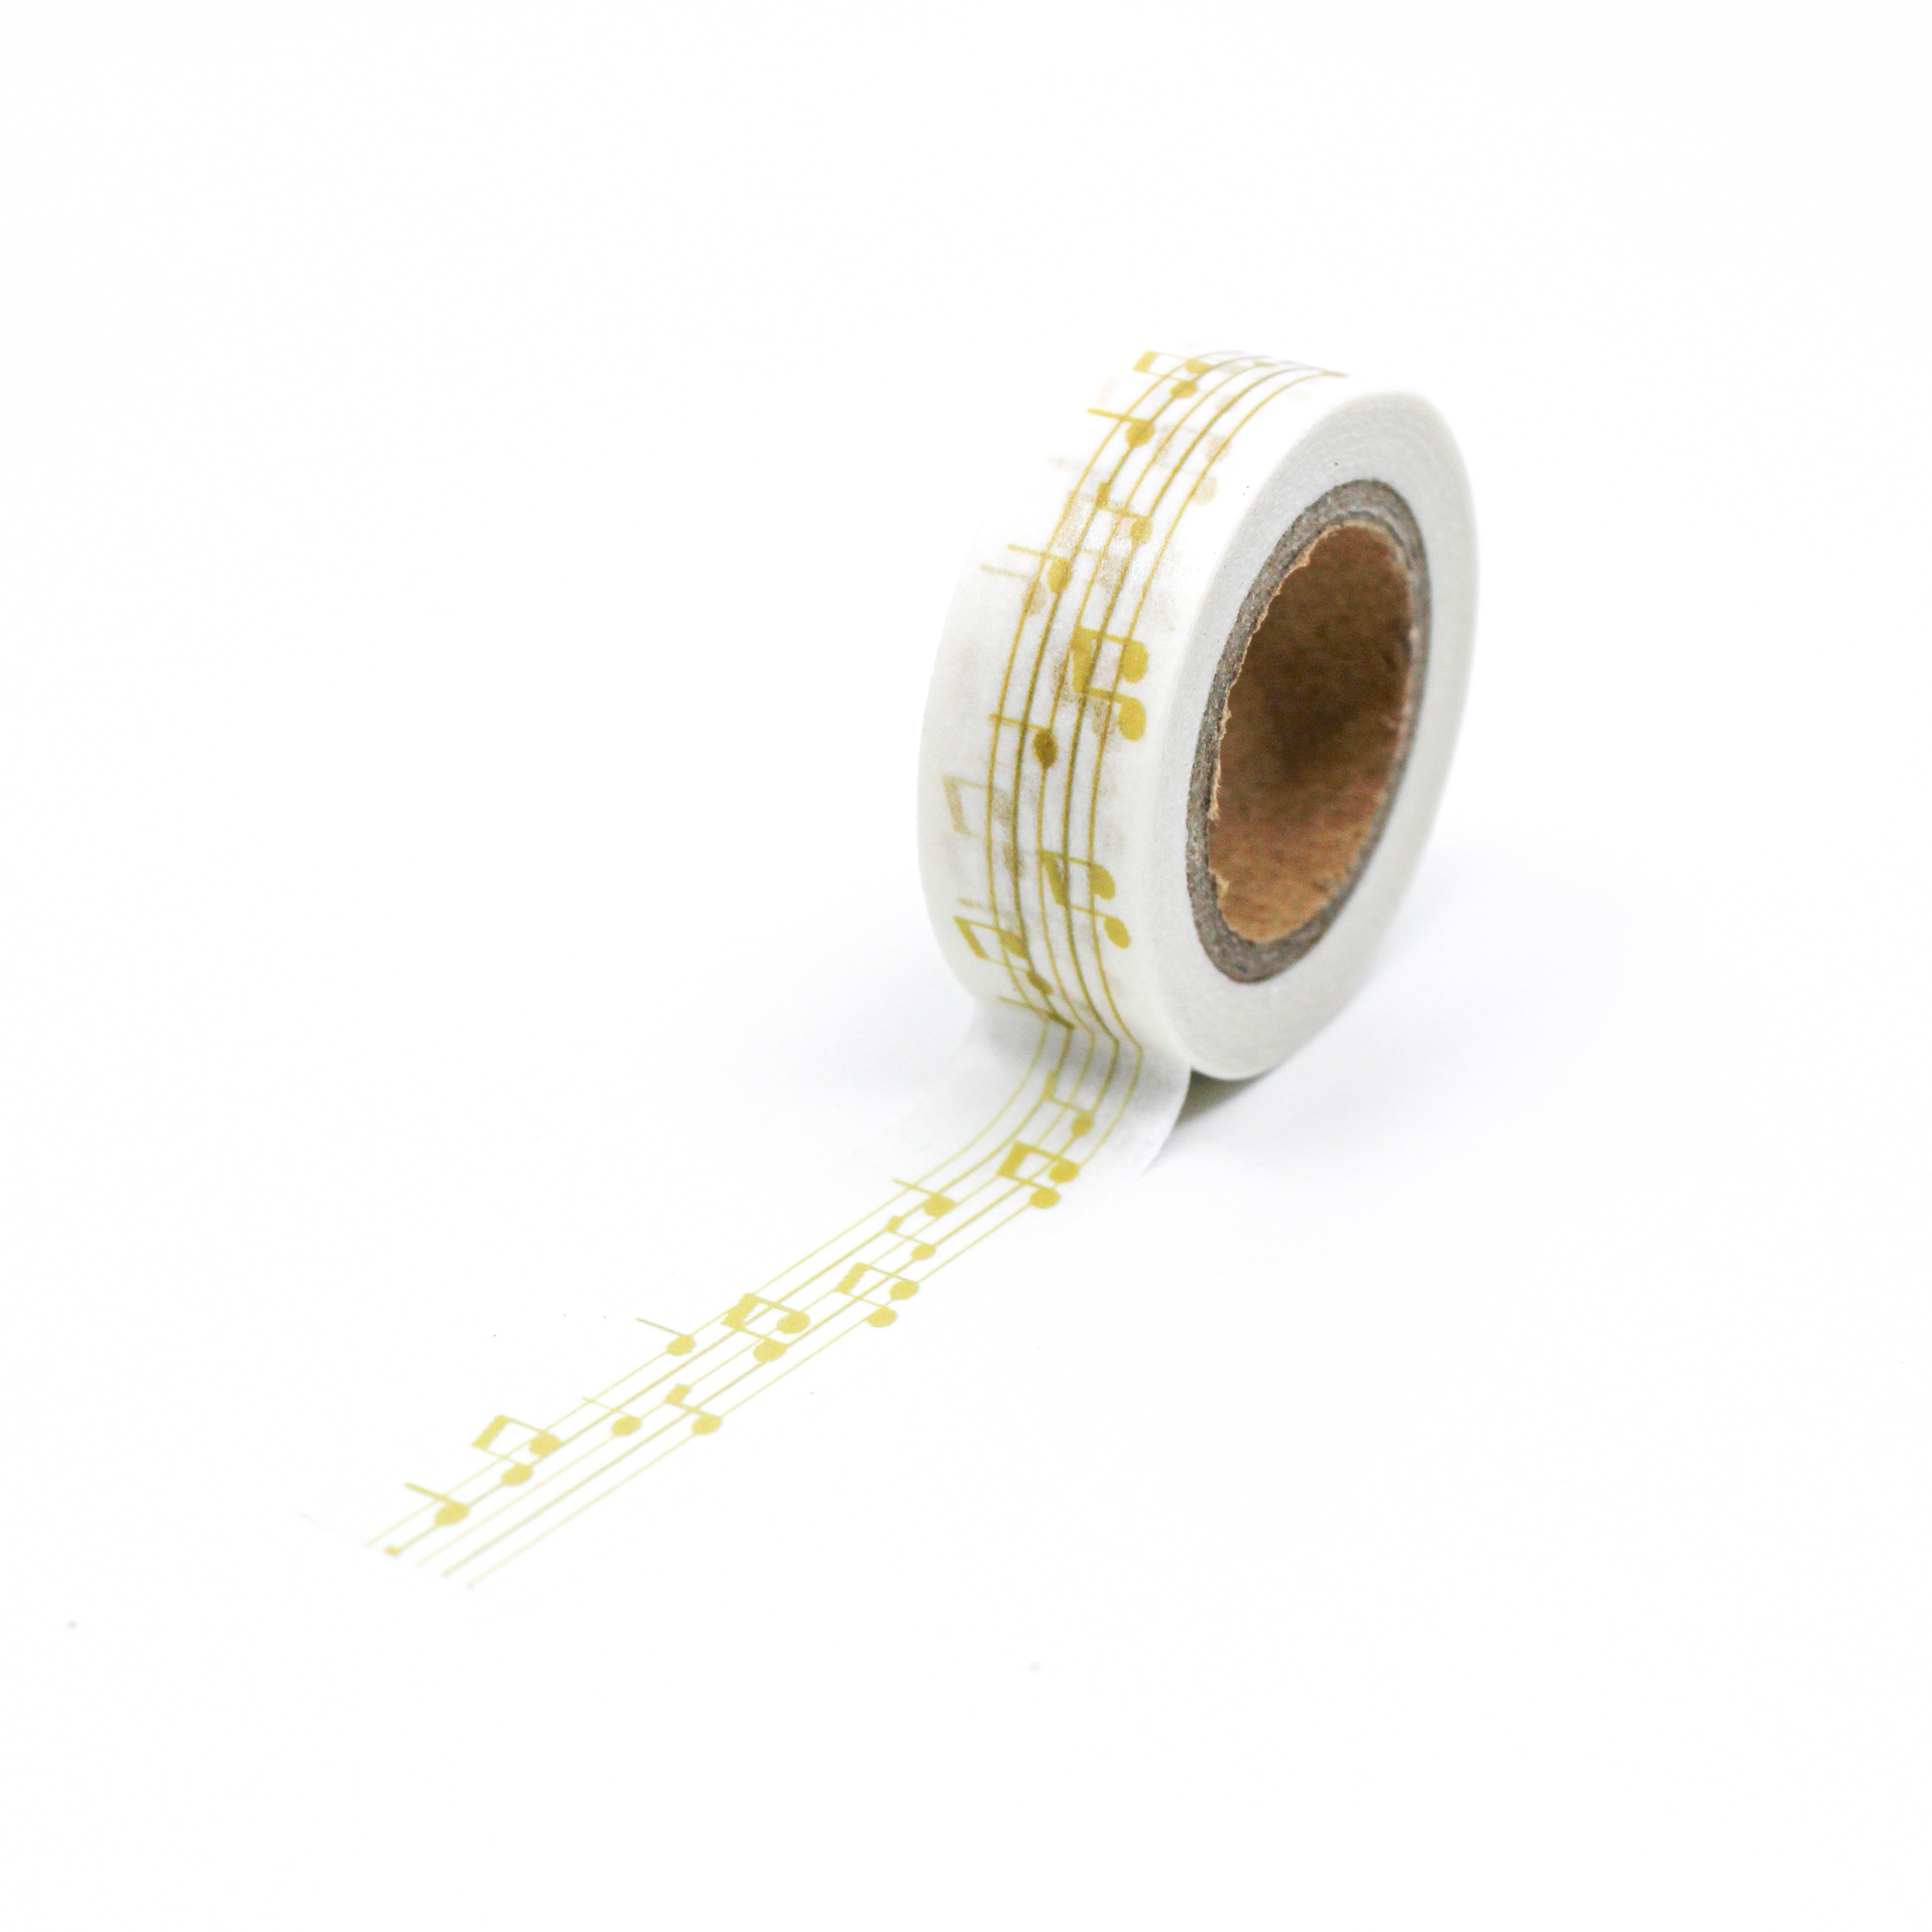 This is a full pattern repeat view of yellow music notes washi tape from BBB Supplies Craft Shop